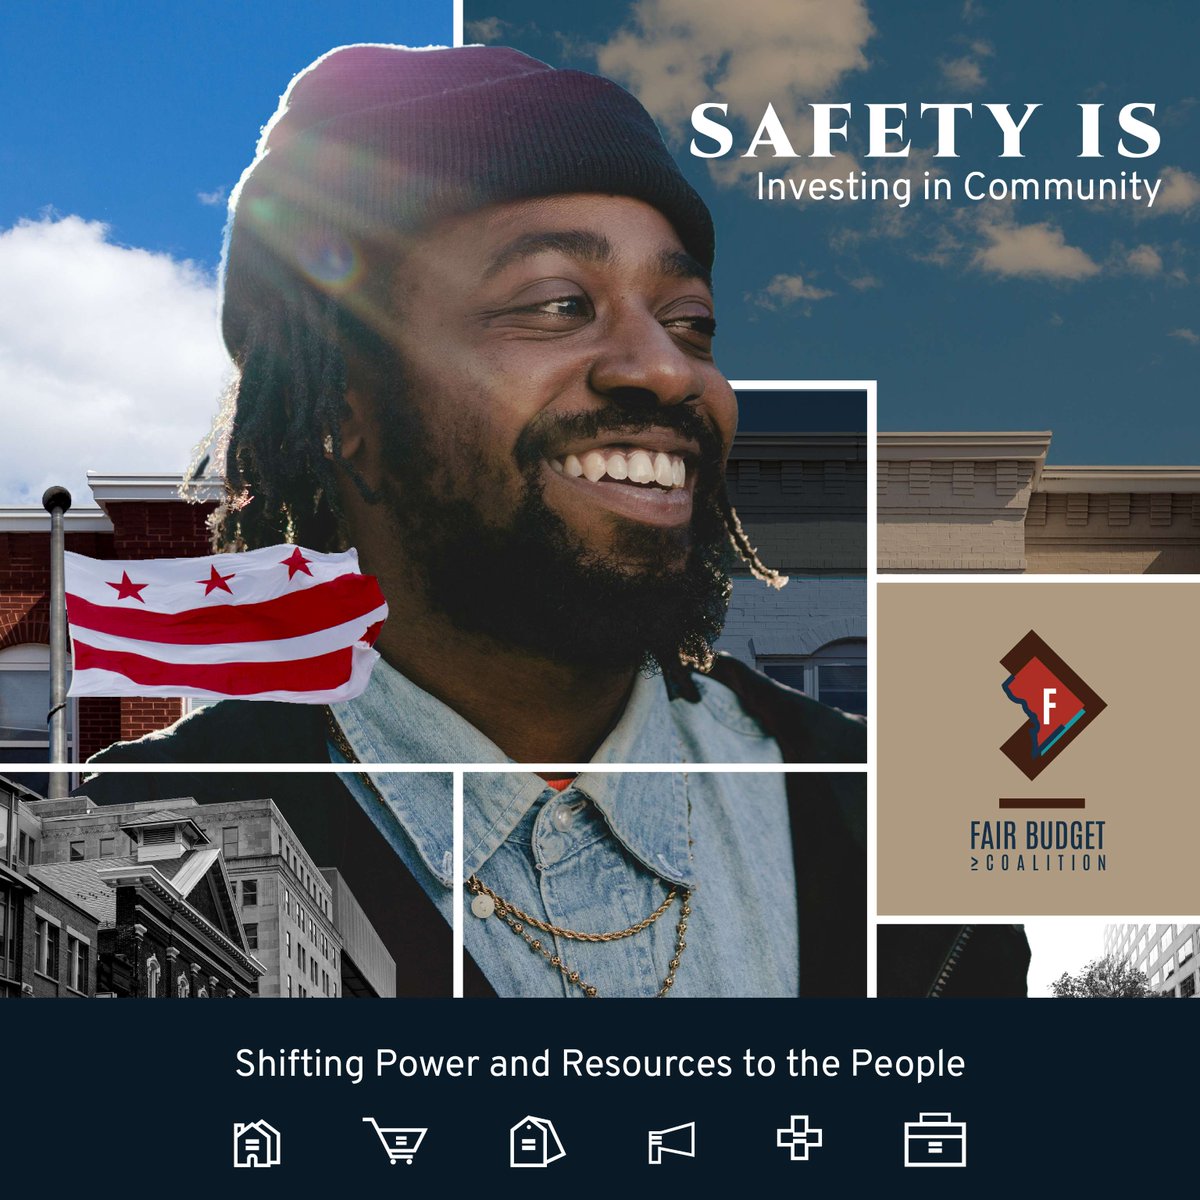 🚨Our community's safety is non-negotiable! We believe in investing in our communities for true safety. Yet, the proposed budget slashes critical programs. Join us and @FairBudgetDC in demanding a budget that prioritizes safety for all. #DCBudget breadforthecity.org/blog/dc-budget…